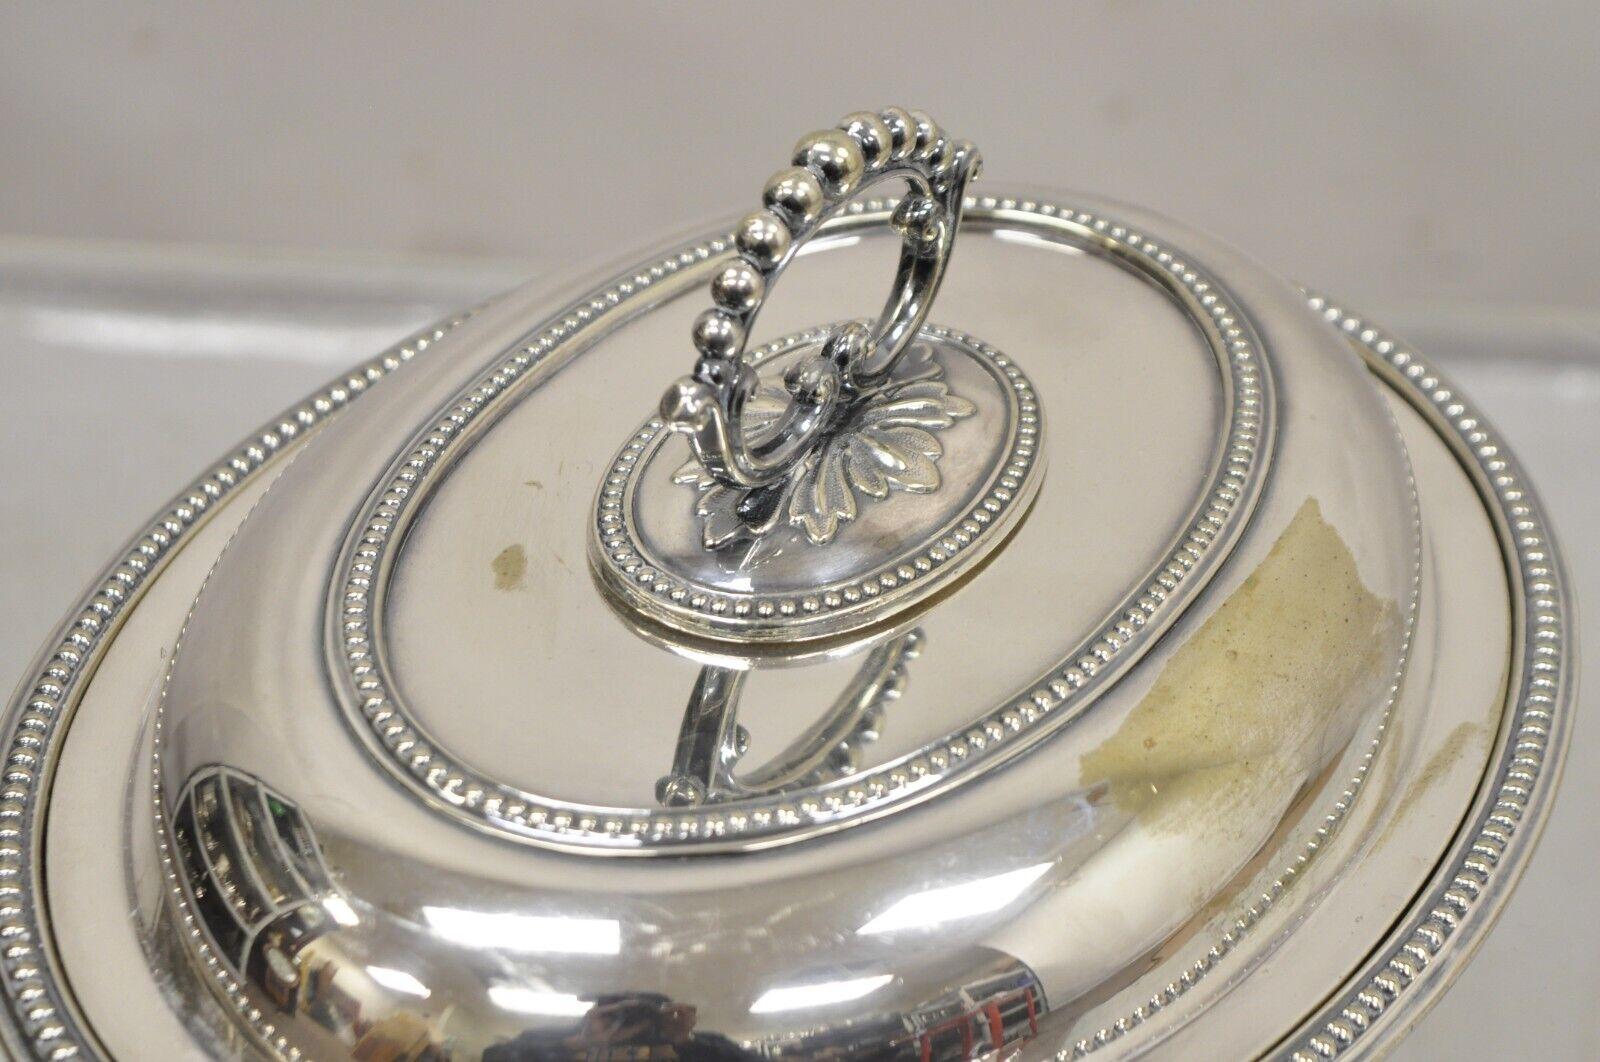 Mappin & Webb's Prince's Plate English Sheffield Silver Plated Covered Dish im Angebot 1